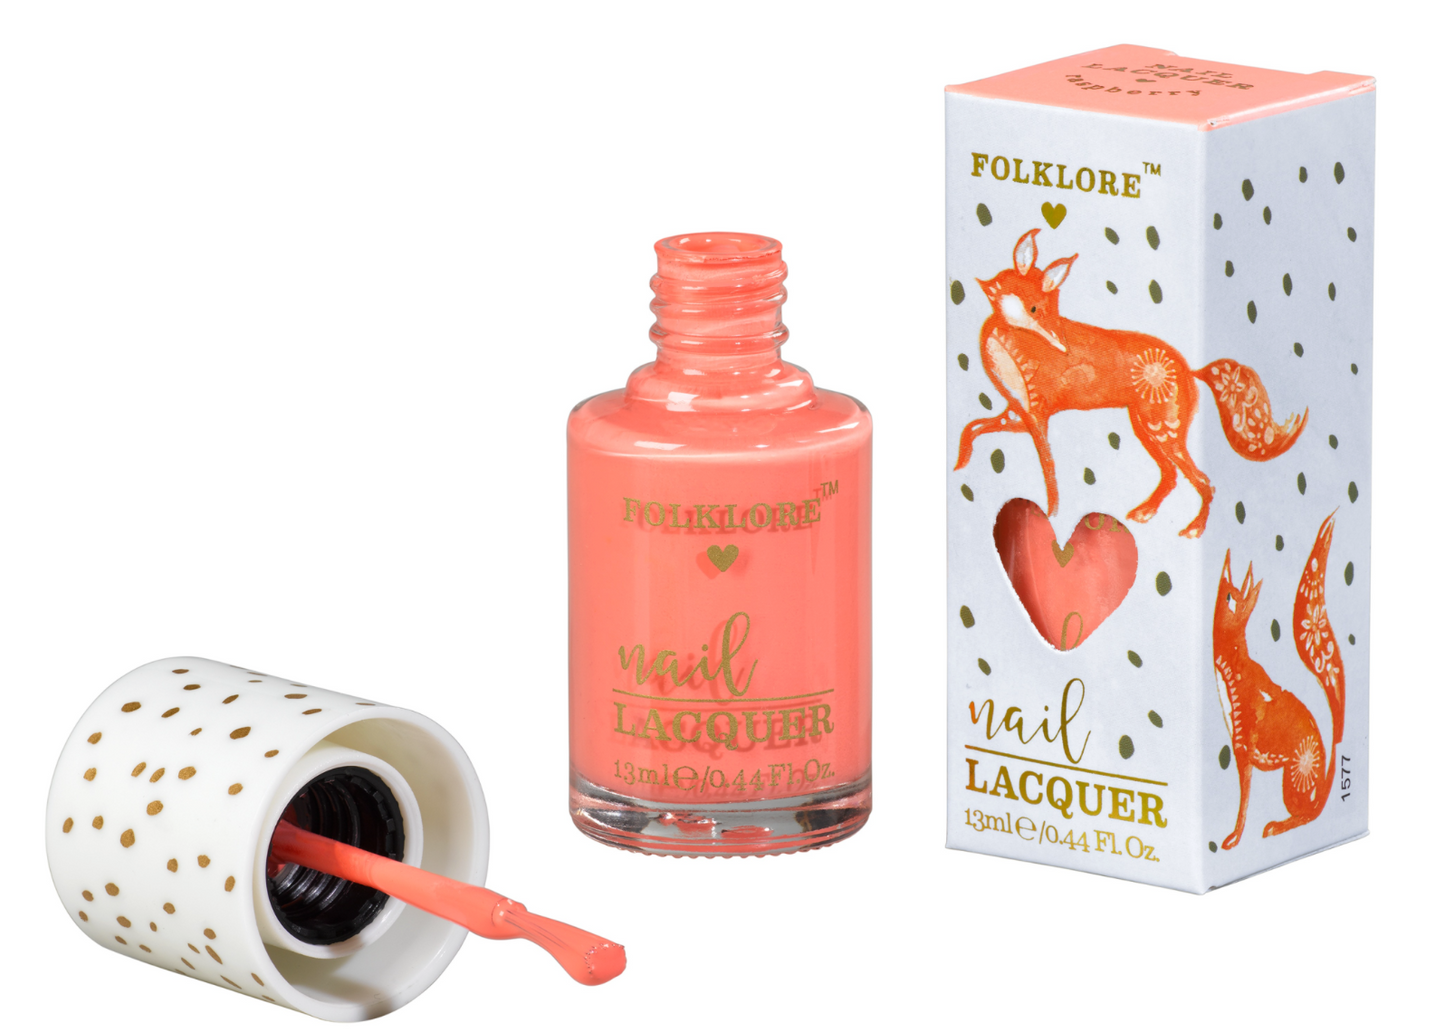 FOLKLORE NAIL LACQUER